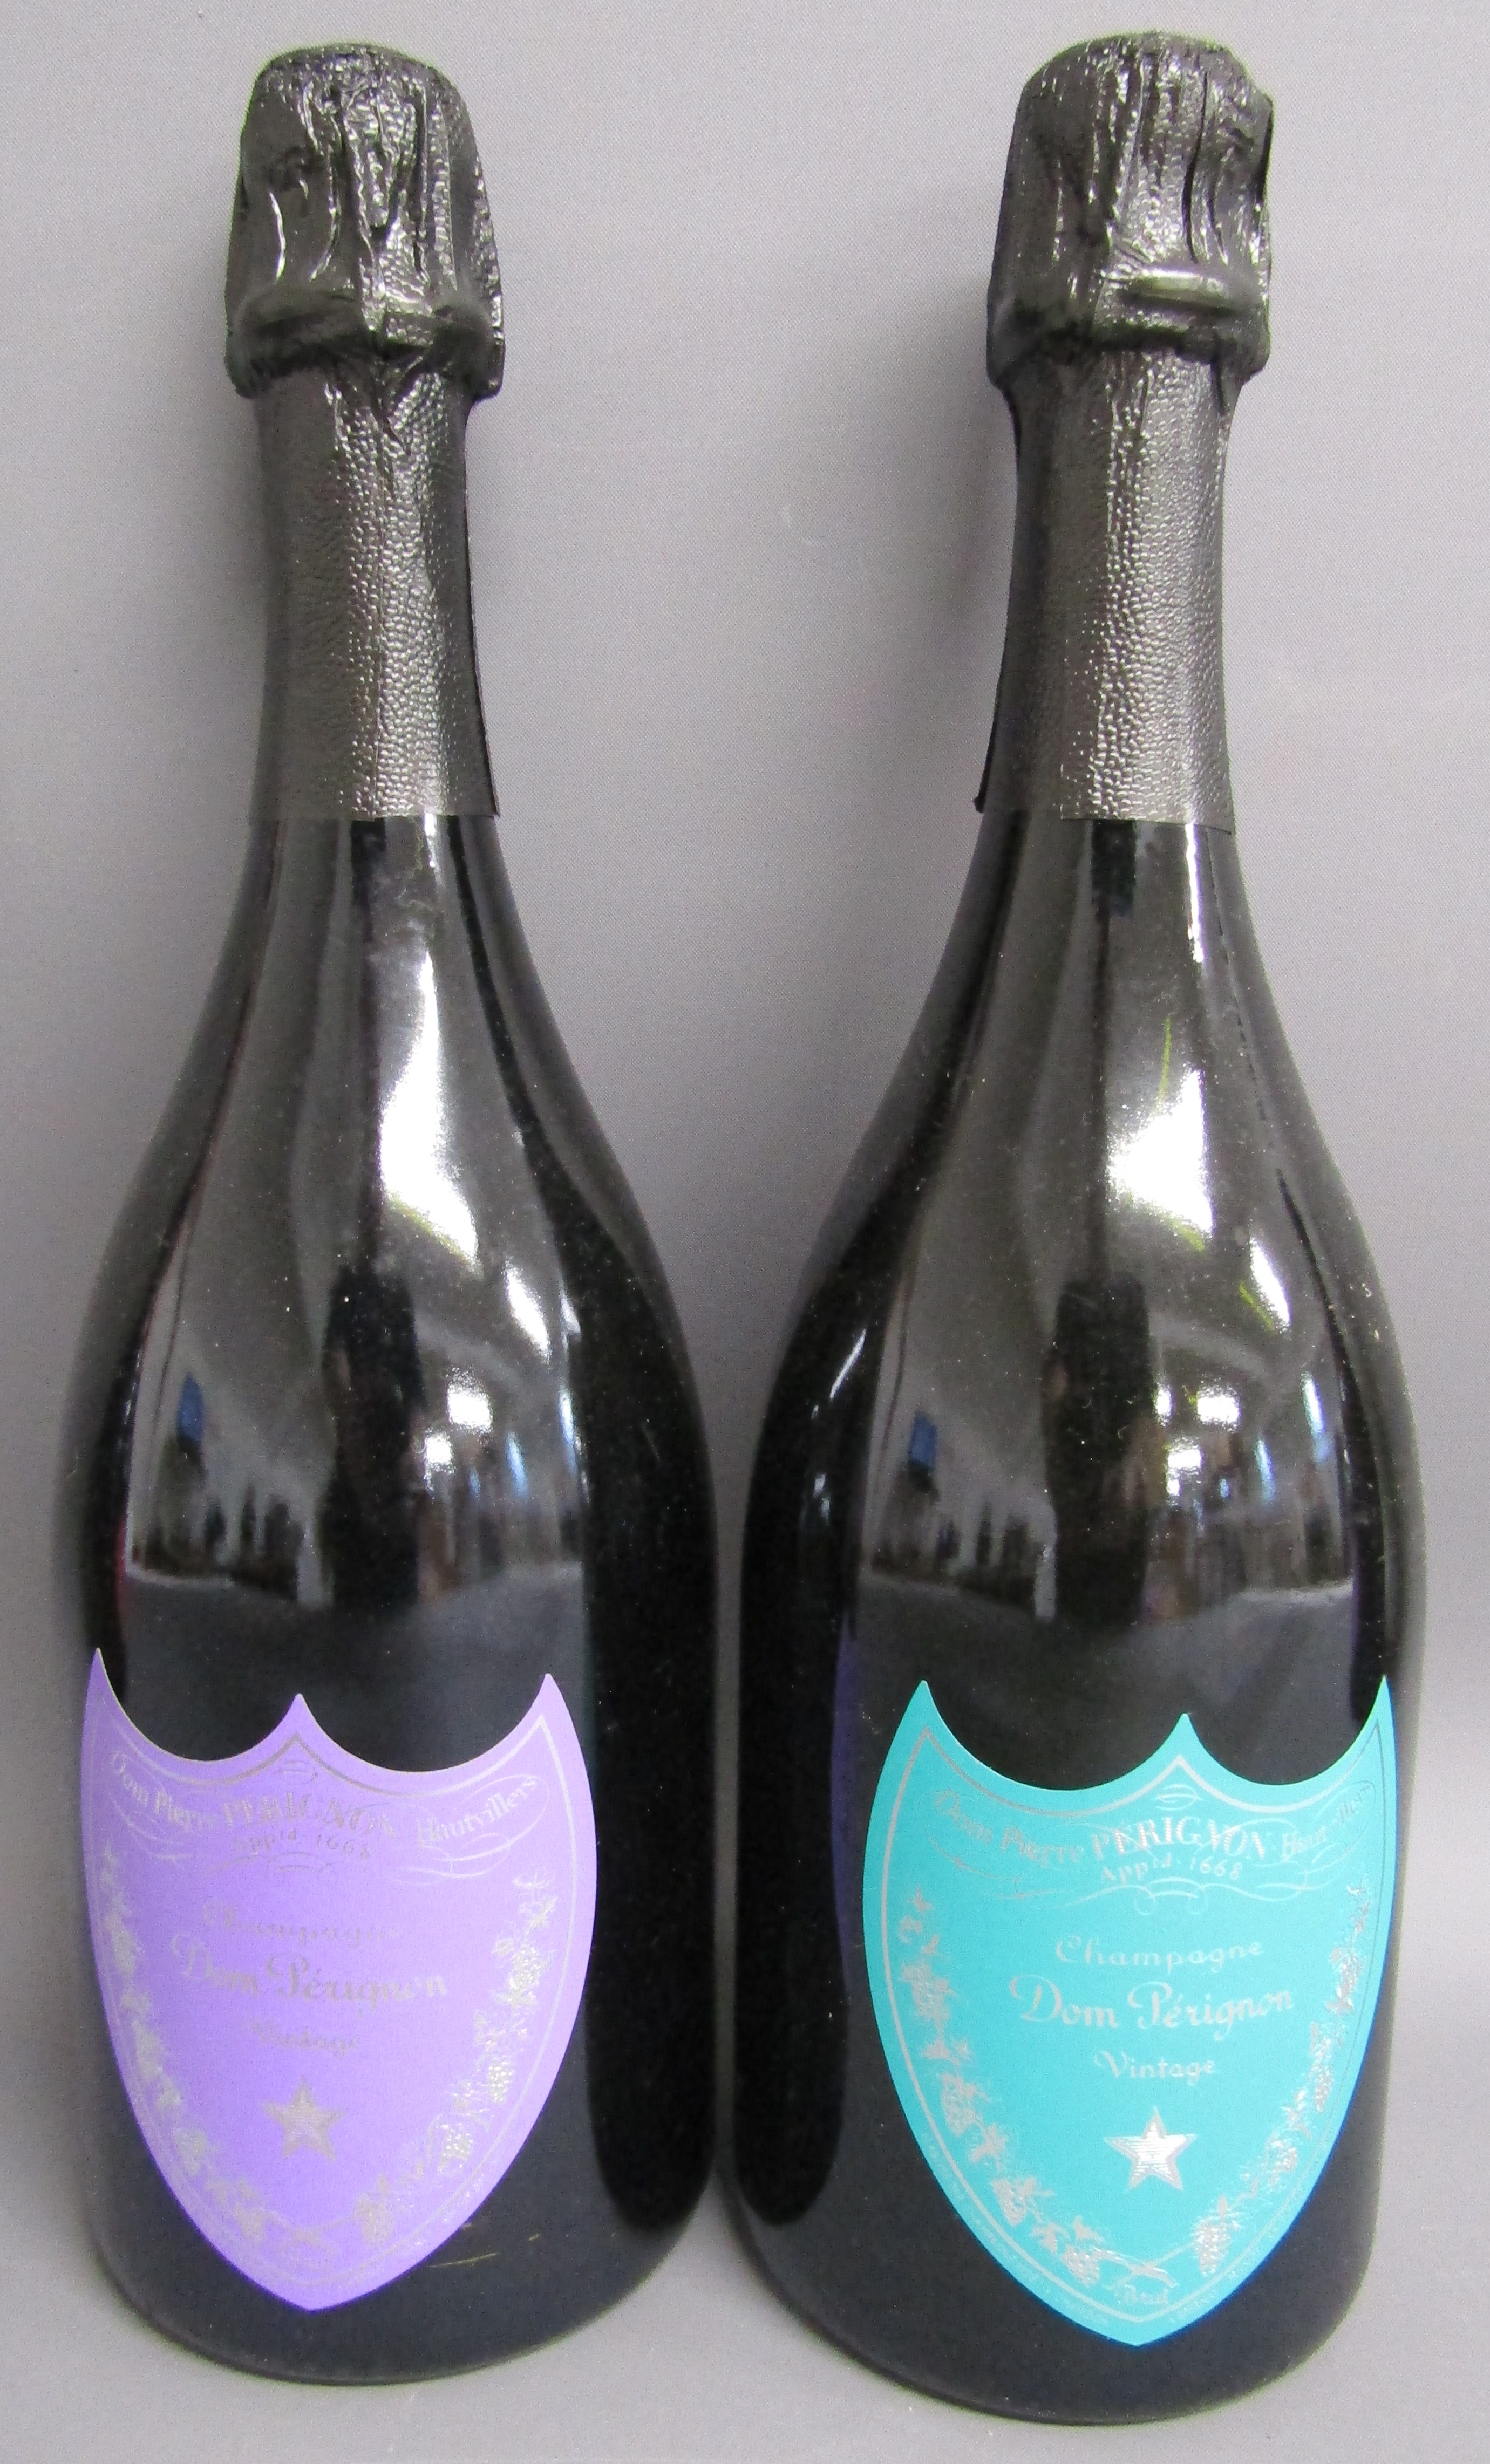 Set of 6 Andy Warhol Tribute Collection Dom Perignon display bottles (empty) - Image 4 of 6